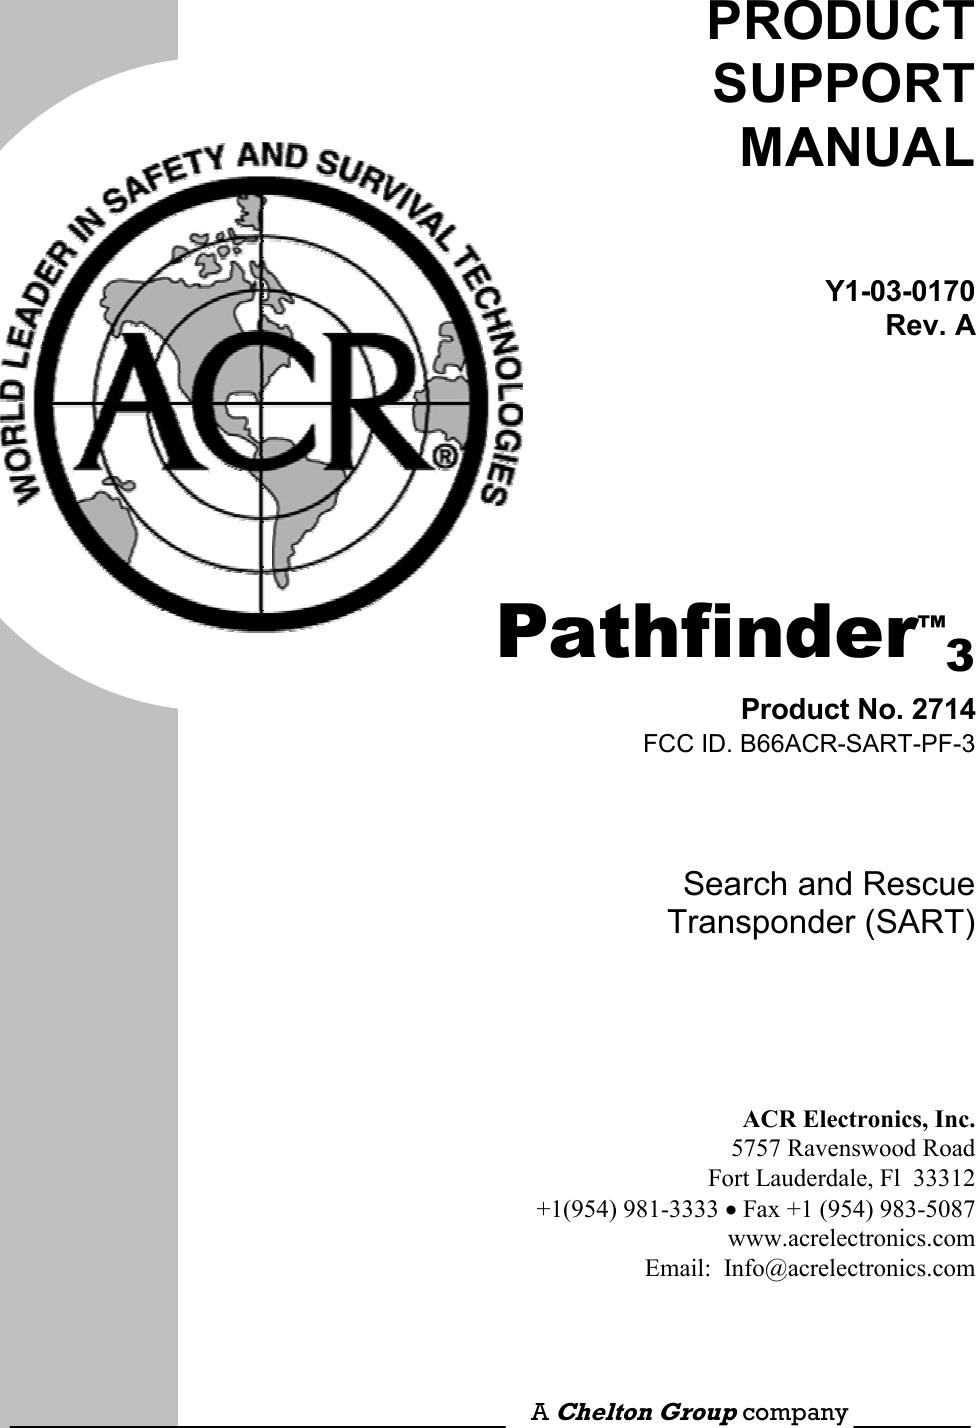     PRODUCT SUPPORT MANUAL Y1-03-0170Rev. A  Pathfinder™3 Product No. 2714FCC ID. B66ACR-SART-PF-3Search and Rescue Transponder (SART)    ACR Electronics, Inc.5757 Ravenswood RoadFort Lauderdale, Fl  33312+1(954) 981-3333 · Fax +1 (954) 983-5087www.acrelectronics.comEmail:  Info@acrelectronics.com  A Chelton Group company 